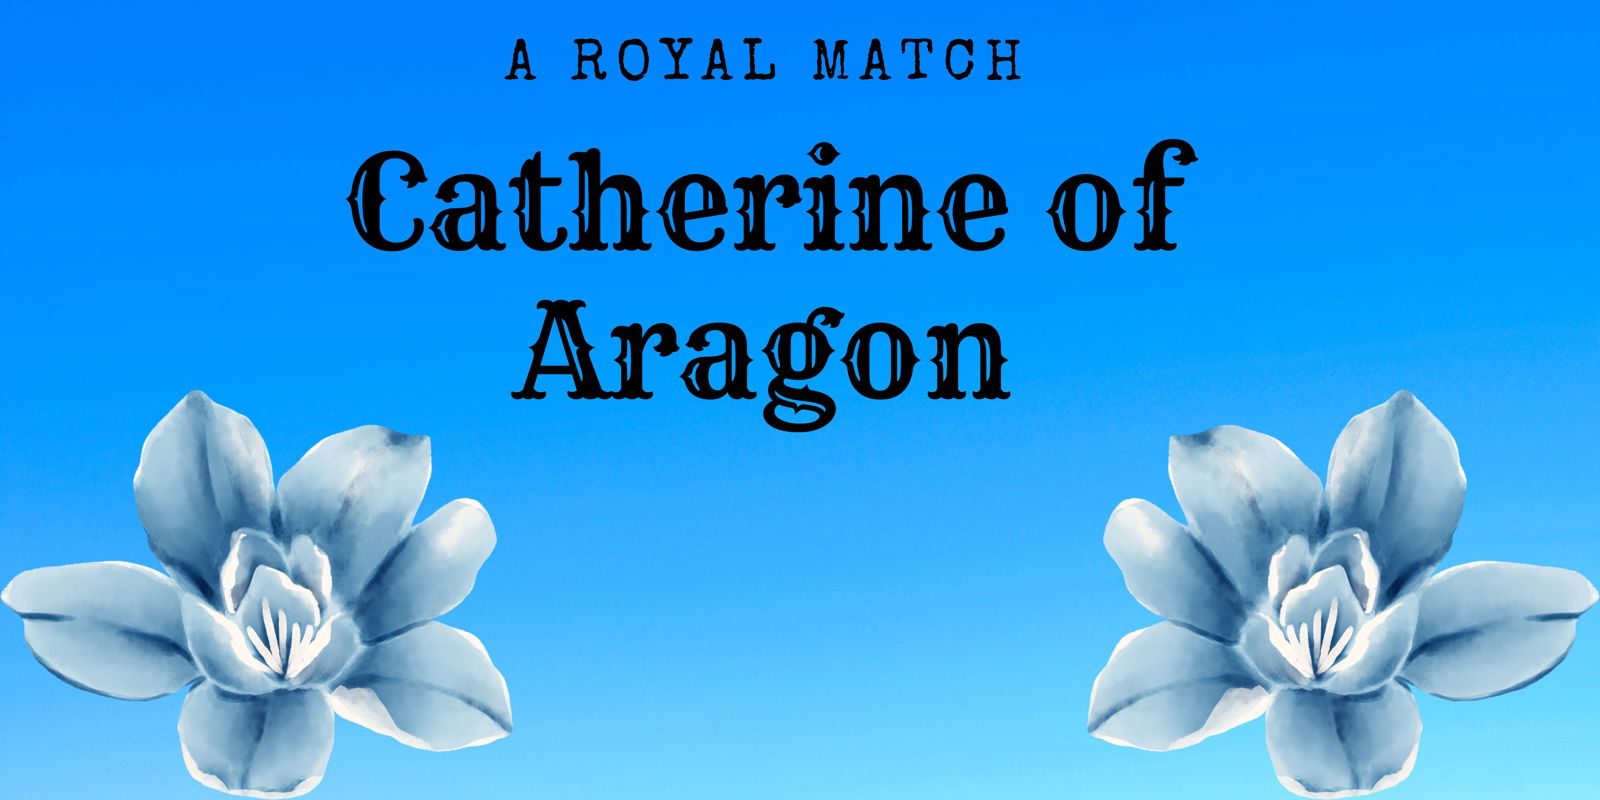 The Royal Match: Catherine of Aragon